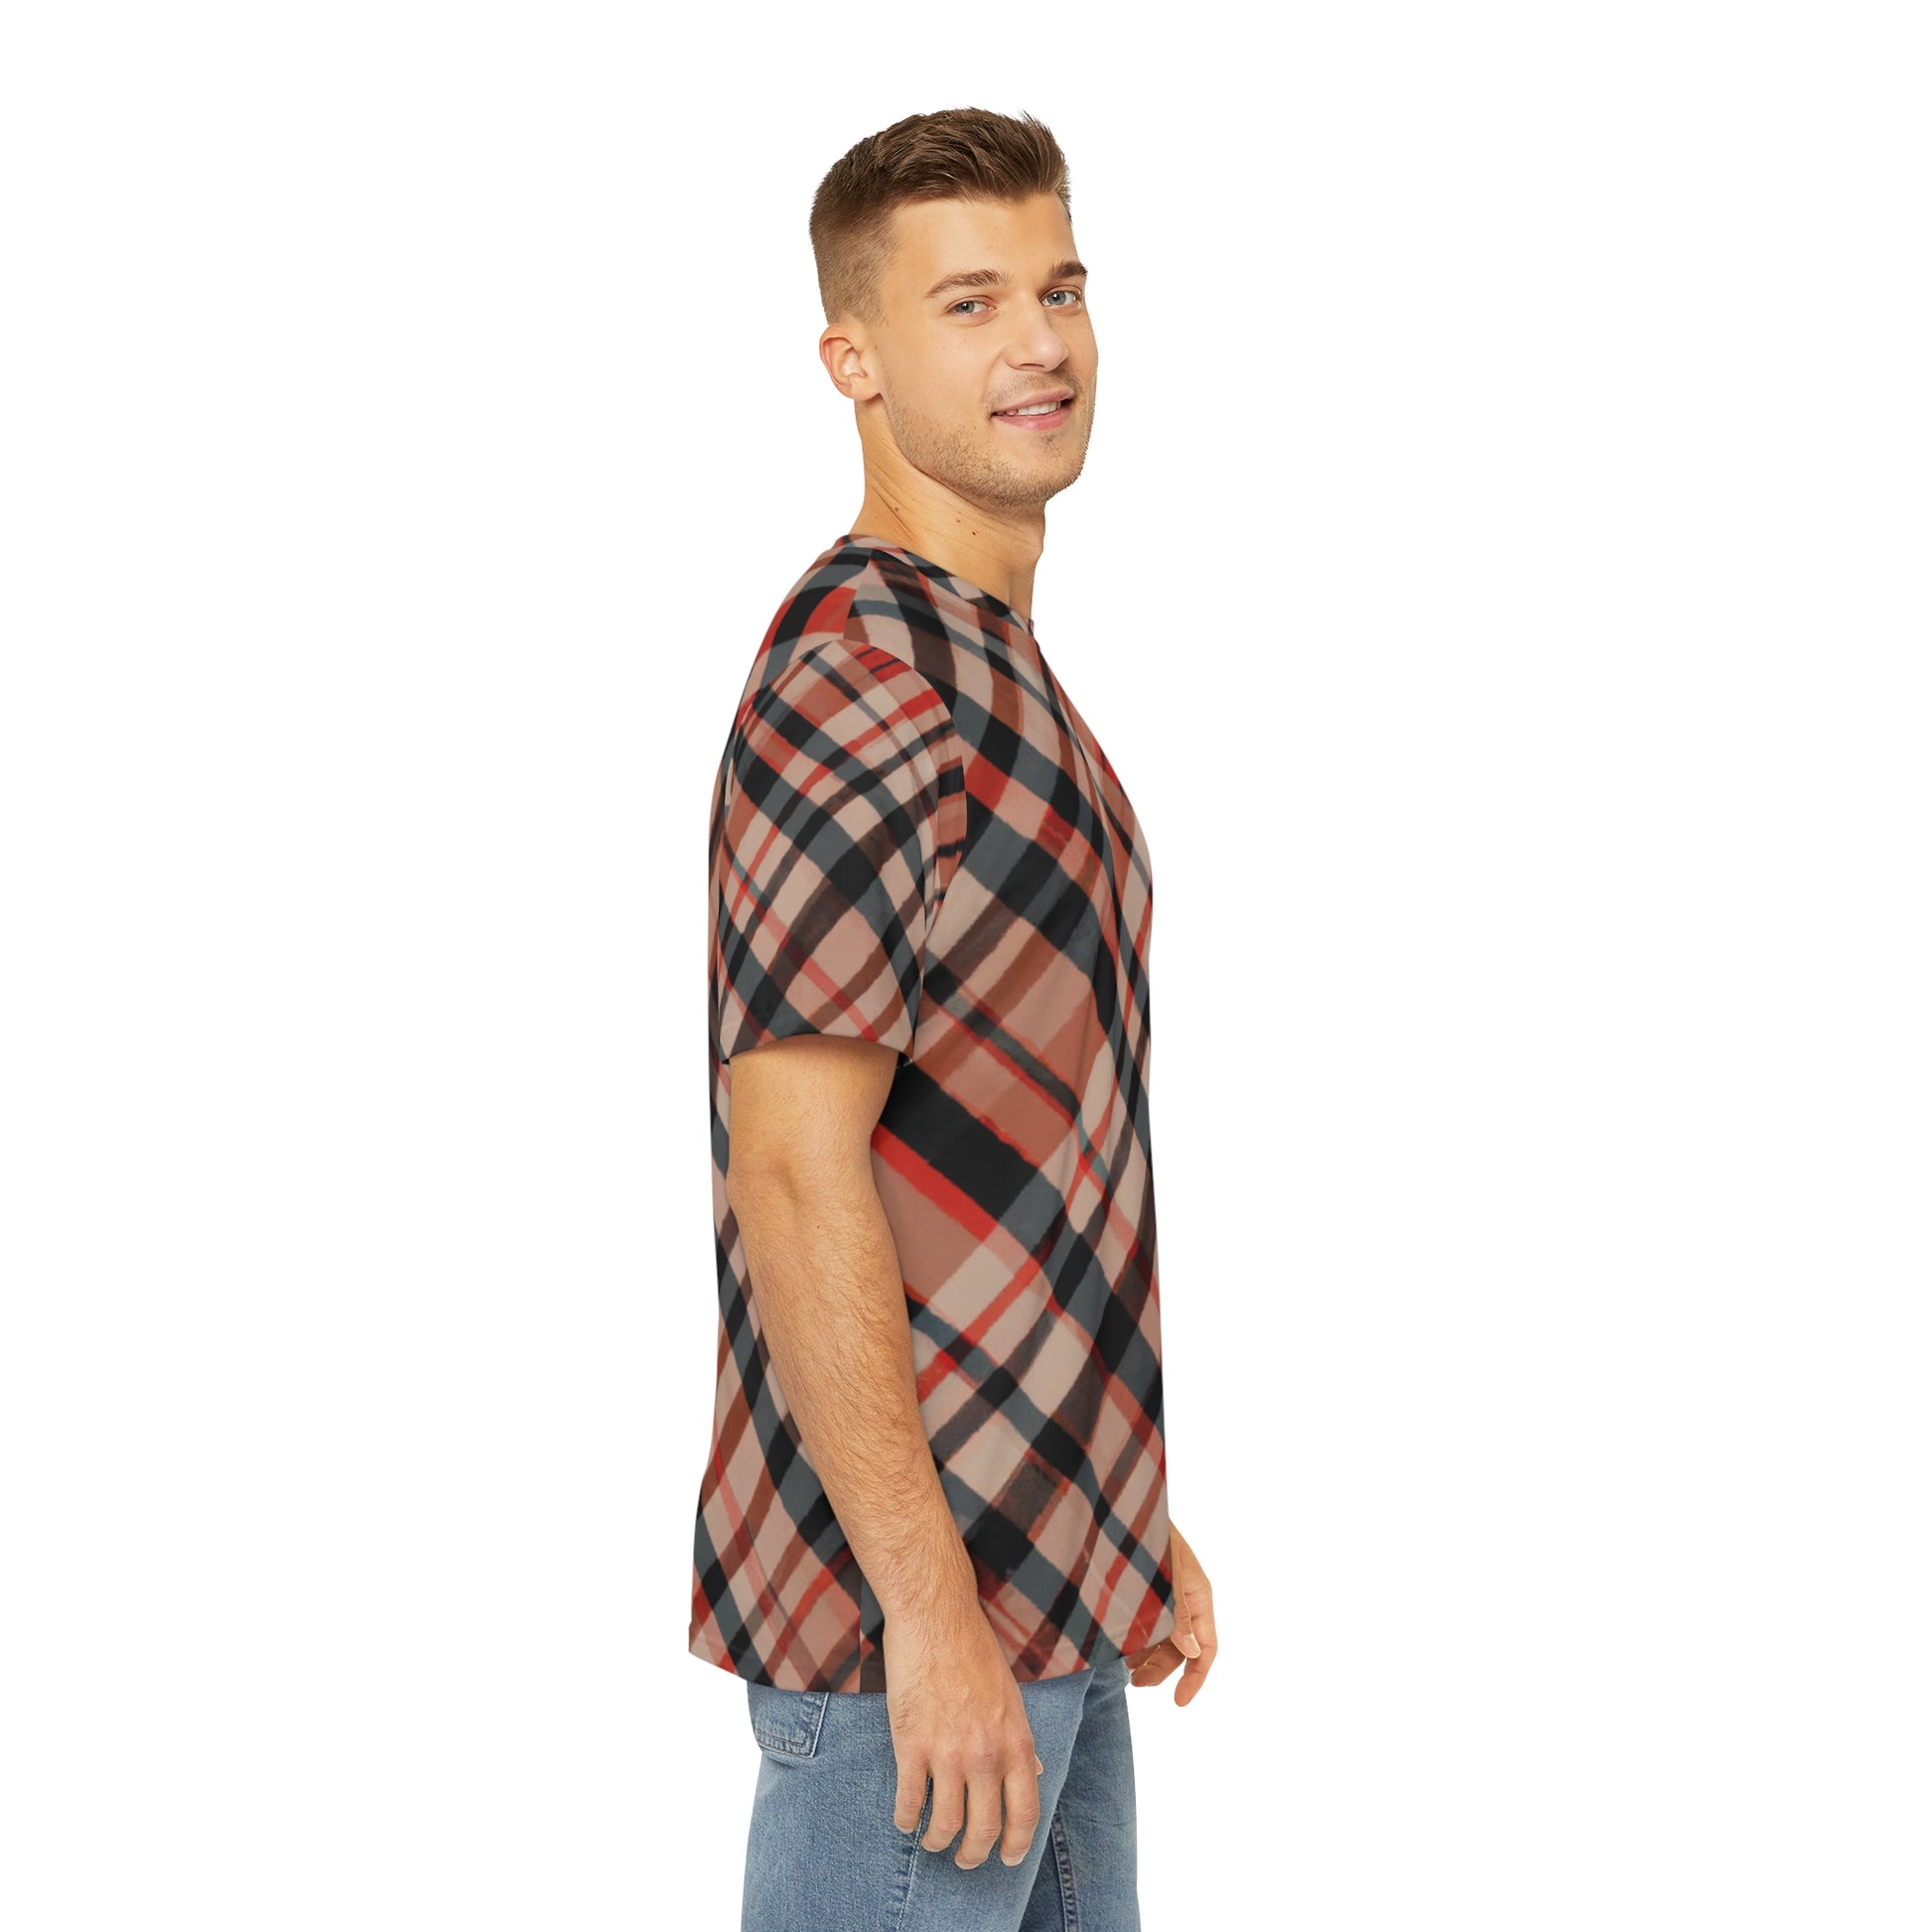 Side view Highland Ember Clash Crewneck Pullover All-Over Print Short-Sleeved Shirt red black beige brown plaid pattern paired with casual denim pants worn by a white man